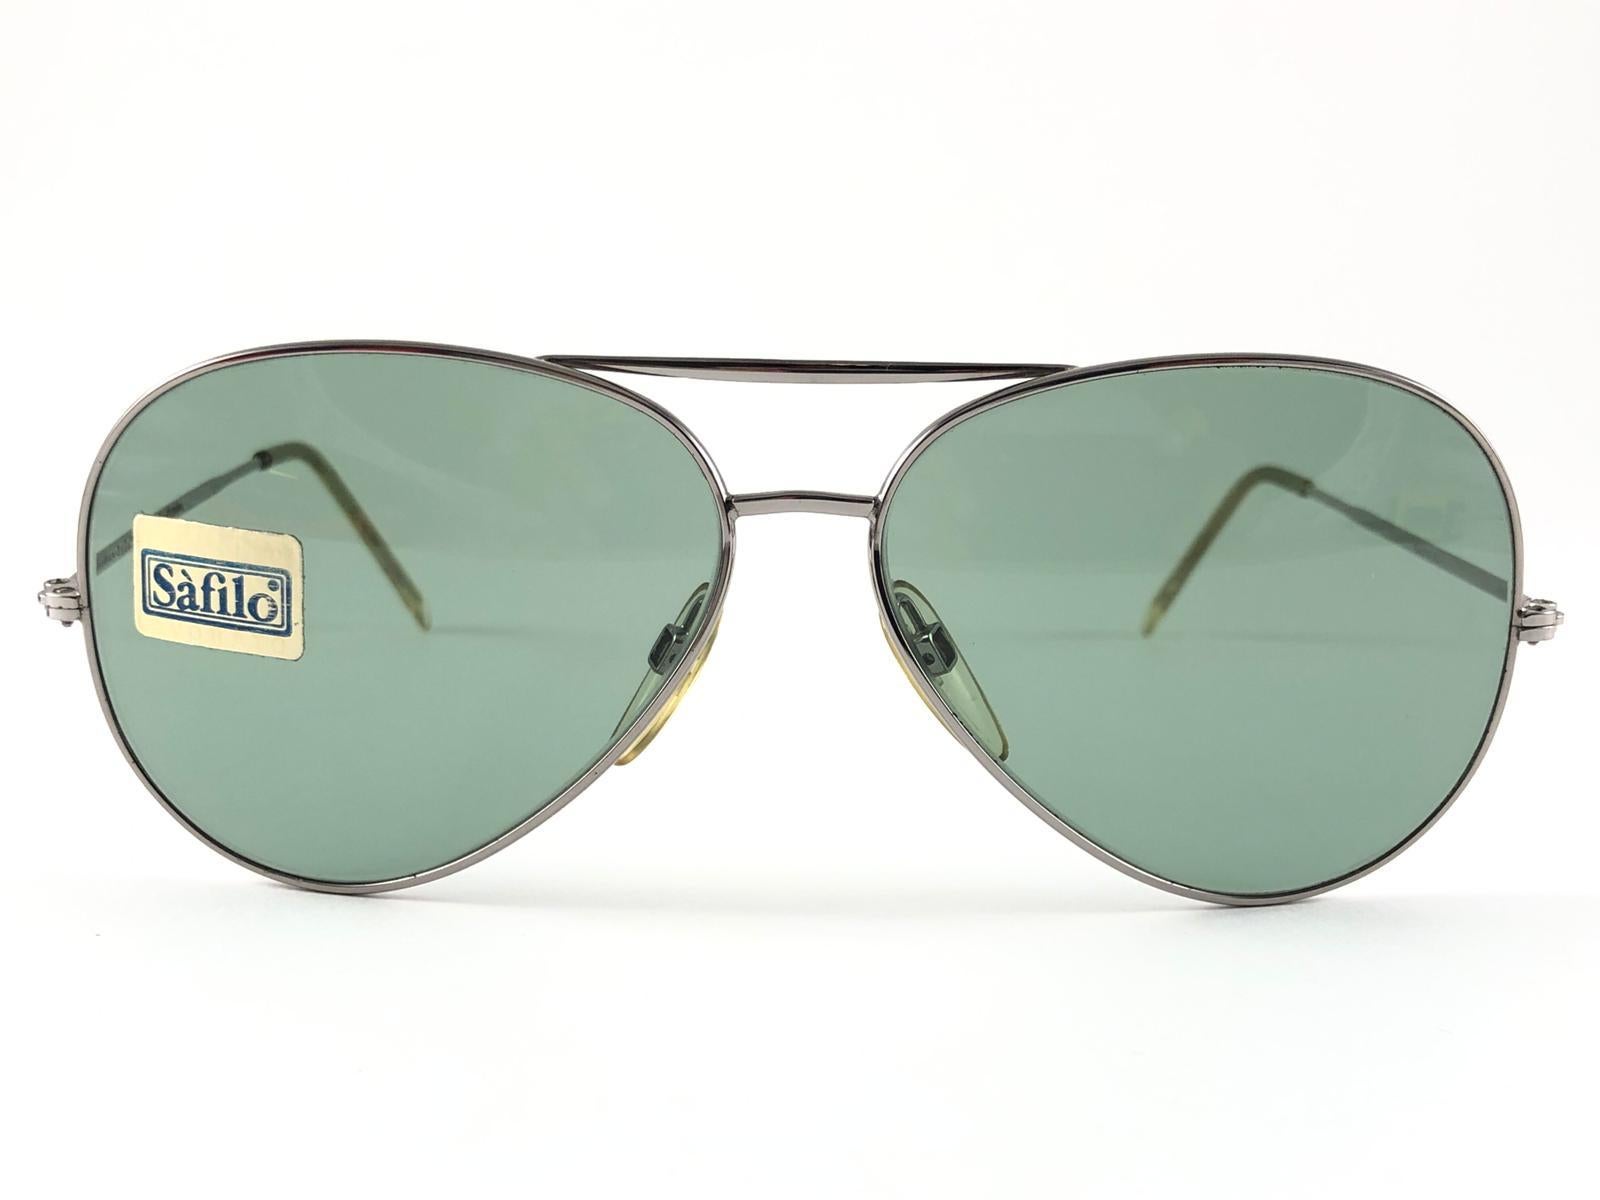 New Vintage Safilo, a balanced combination of Italian craftsmanship, design, functionality and striking aesthetics, this model showcases a really strong and unique Silver Aviator frame holding spotless Green lenses.

New, never worn or